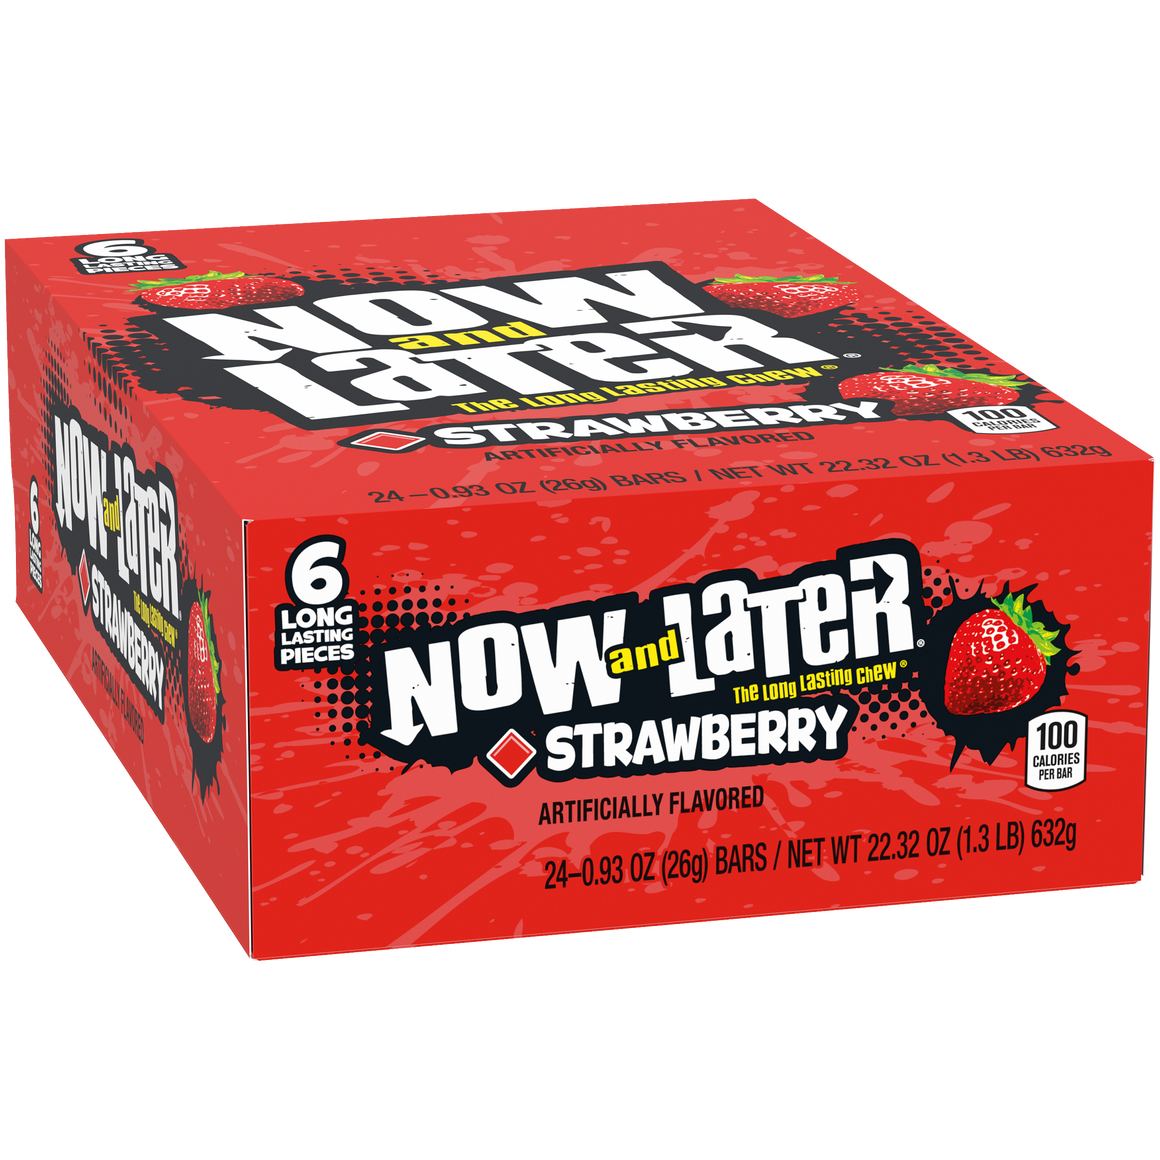 All City Candy Now and Later Strawberry Candy 6-Pack Case of 24 Taffy Ferrara Candy CompanyFor fresh candy and great service, visit www.allcitycandy.com